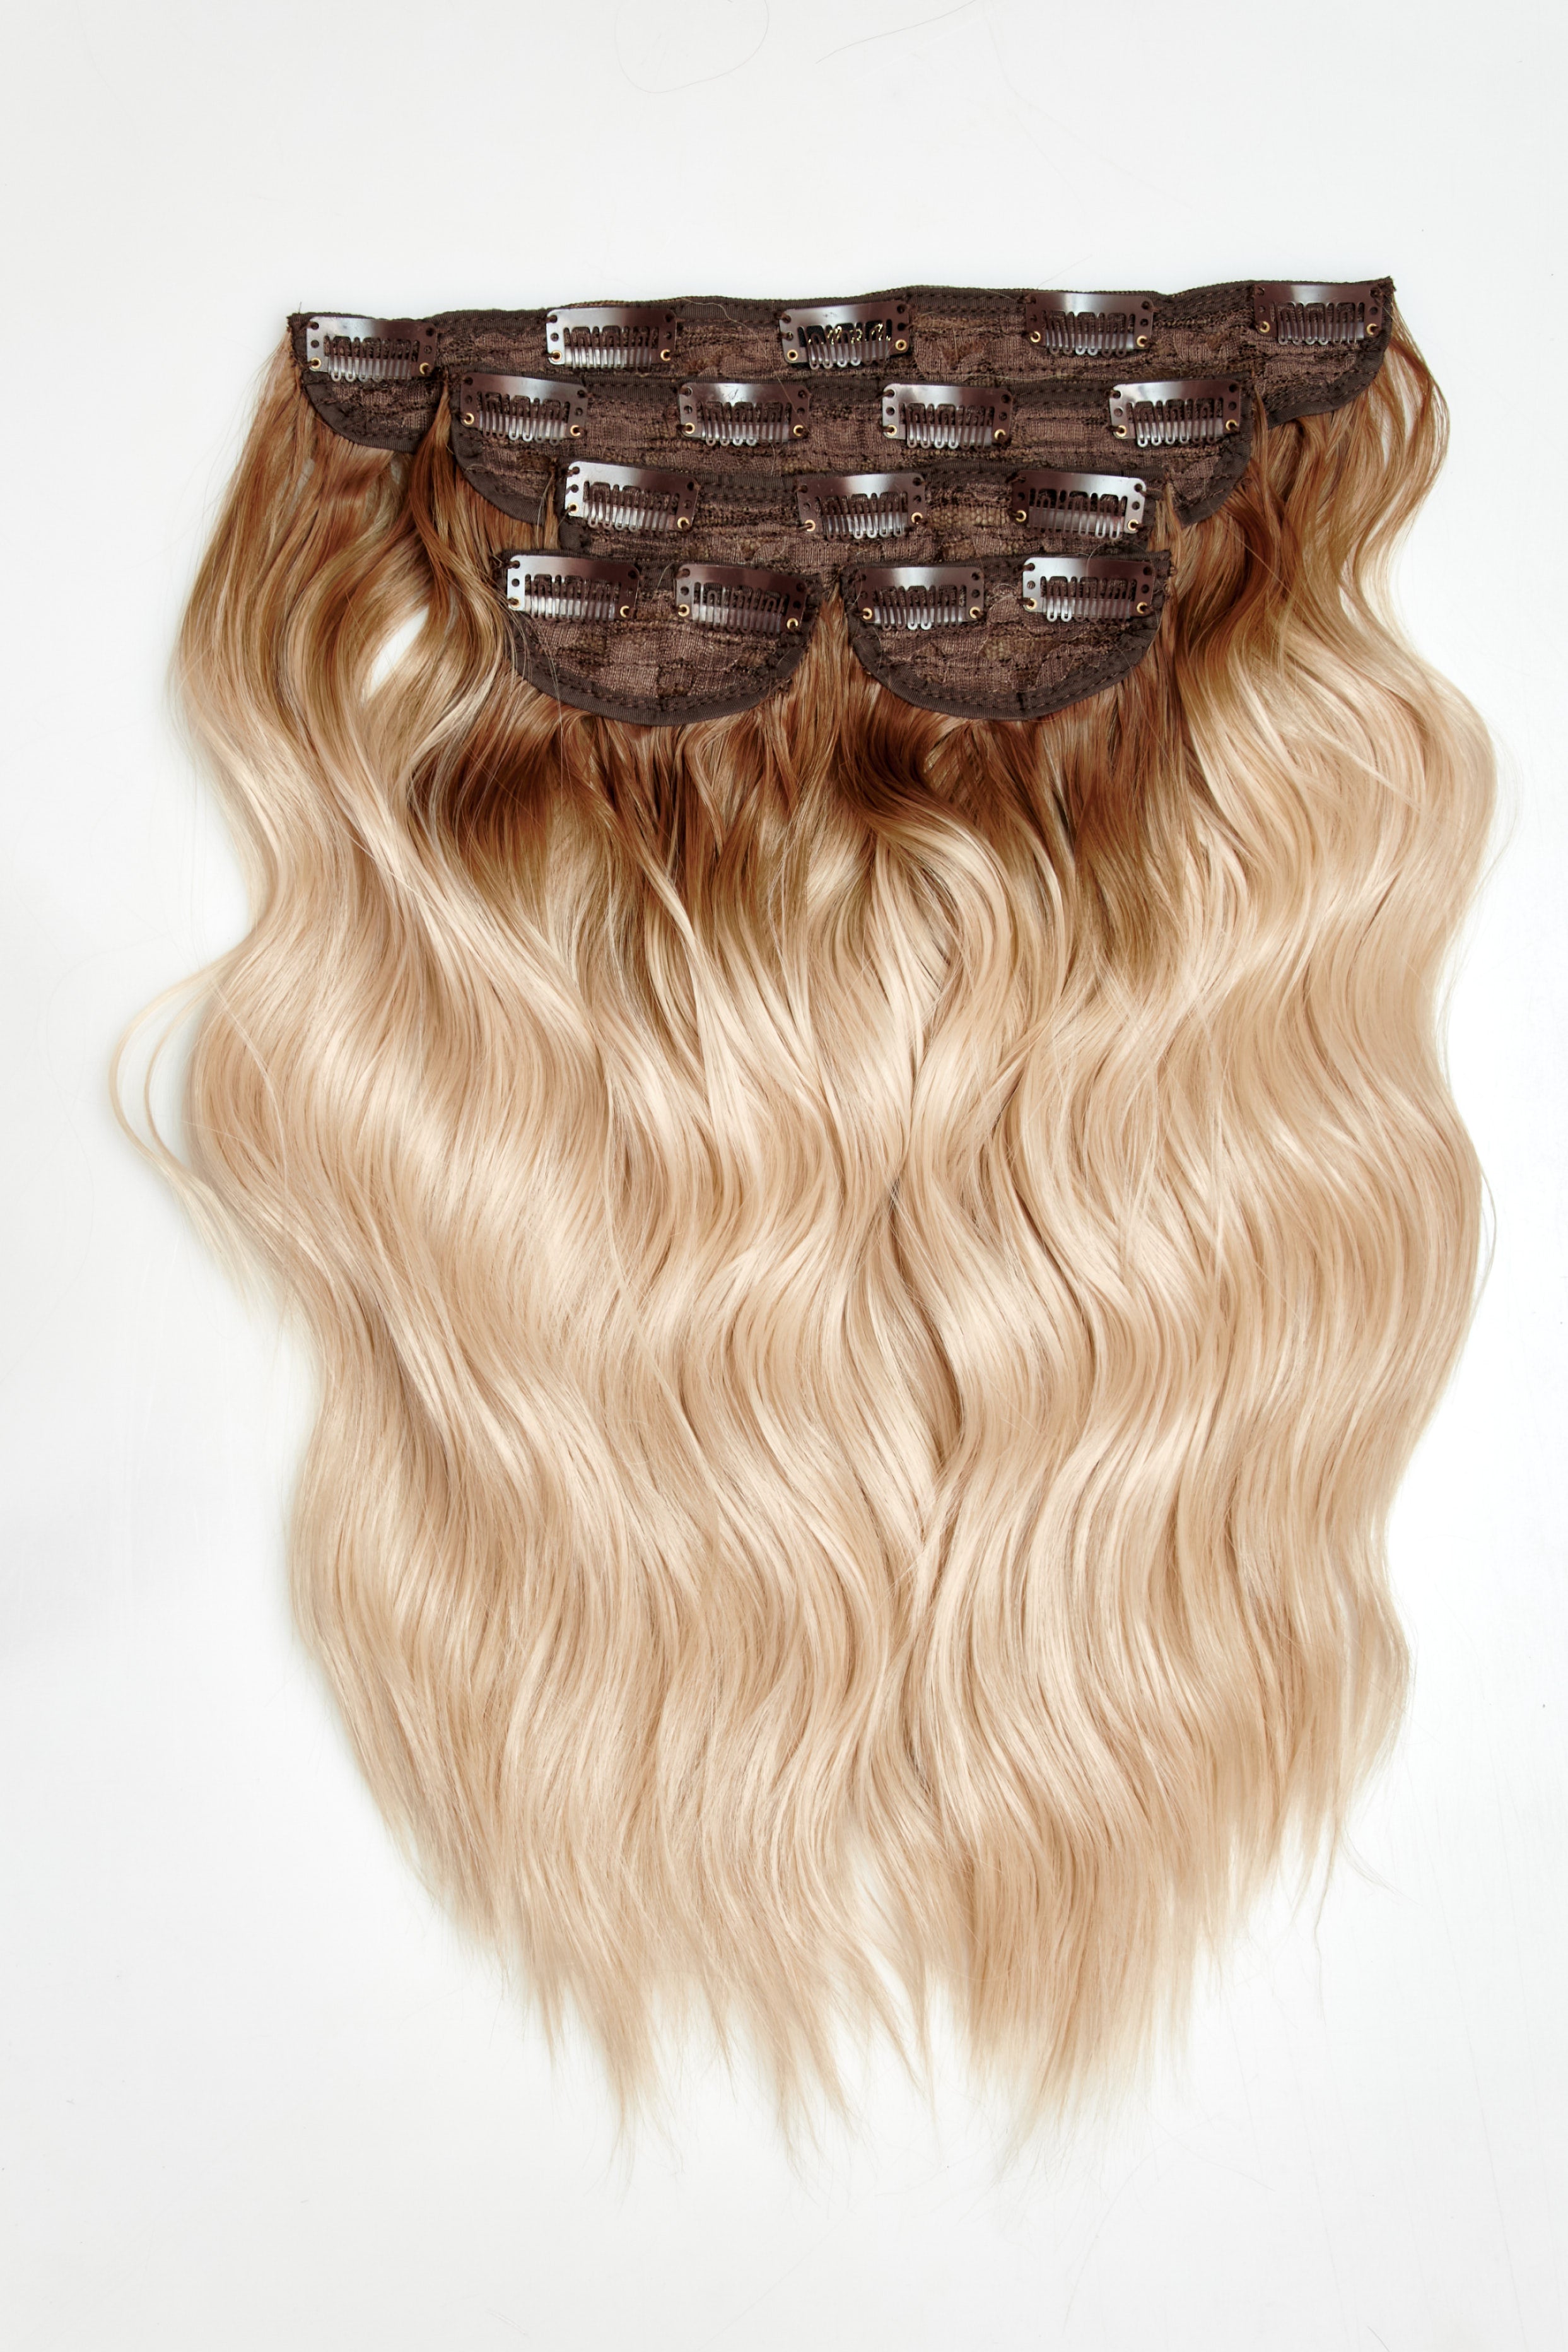 Super Thick 16’’ 5 Piece Brushed Out Wave Clip In Hair Extensions - Rooted Light Blonde